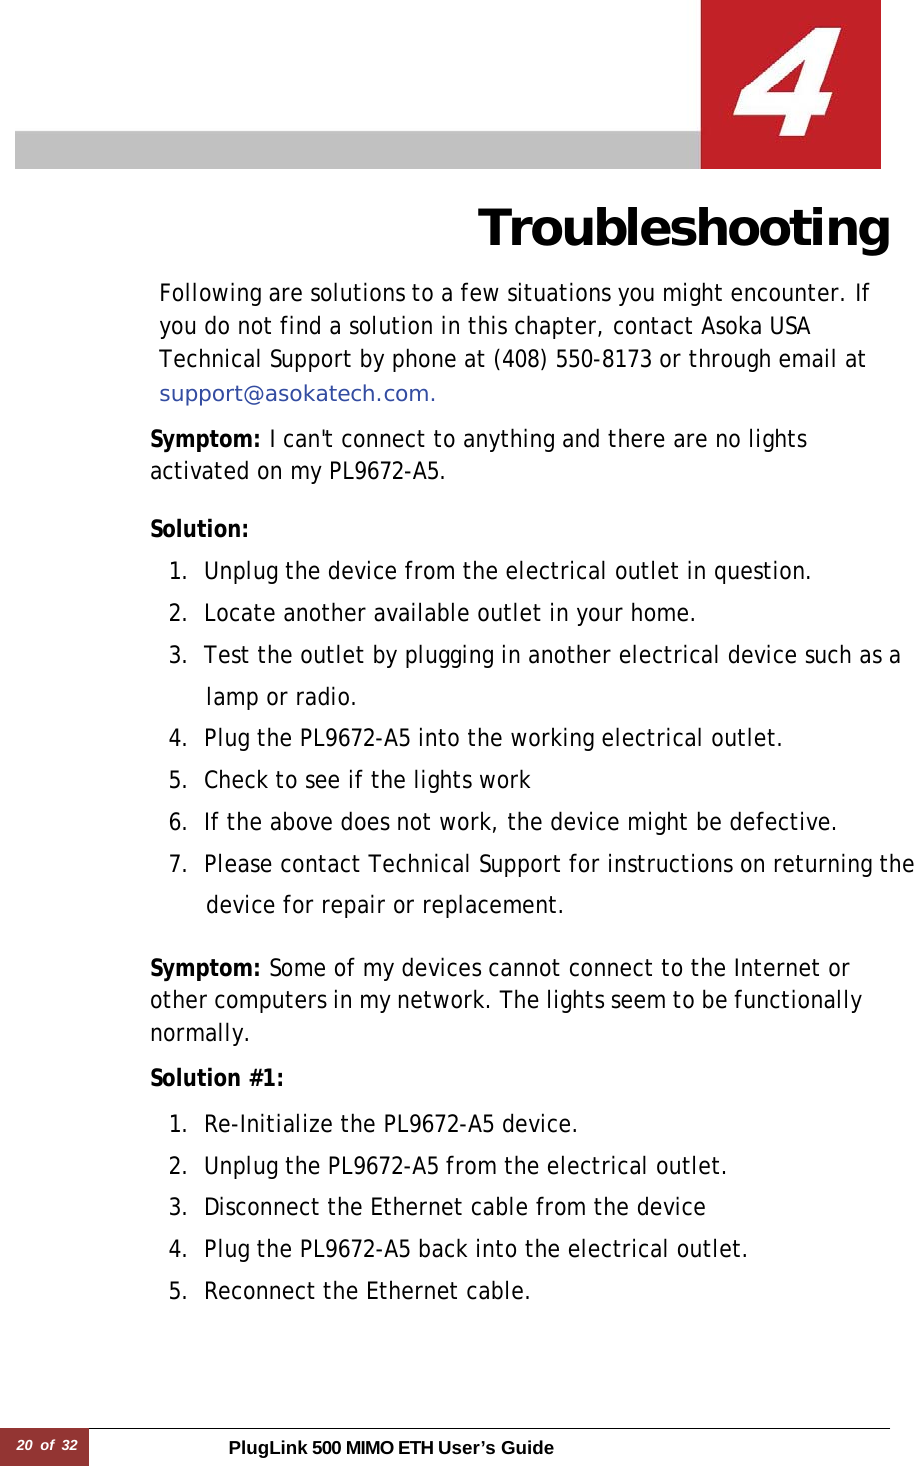 20 of 32 PlugLink 500 MIMO ETH User’s Guide   Troubleshooting  Following are solutions to a few situations you might encounter. If you do not find a solution in this chapter, contact Asoka USA Technical Support by phone at (408) 550-8173 or through email at support@asokatech.com.  Symptom: I can&apos;t connect to anything and there are no lights activated on my PL9672-A5.  Solution:  1. Unplug the device from the electrical outlet in question. 2. Locate another available outlet in your home. 3. Test the outlet by plugging in another electrical device such as a lamp or radio. 4. Plug the PL9672-A5 into the working electrical outlet. 5. Check to see if the lights work 6. If the above does not work, the device might be defective. 7. Please contact Technical Support for instructions on returning the device for repair or replacement.  Symptom: Some of my devices cannot connect to the Internet or other computers in my network. The lights seem to be functionally normally.  Solution #1:  1. Re-Initialize the PL9672-A5 device. 2. Unplug the PL9672-A5 from the electrical outlet. 3. Disconnect the Ethernet cable from the device 4. Plug the PL9672-A5 back into the electrical outlet. 5. Reconnect the Ethernet cable. 